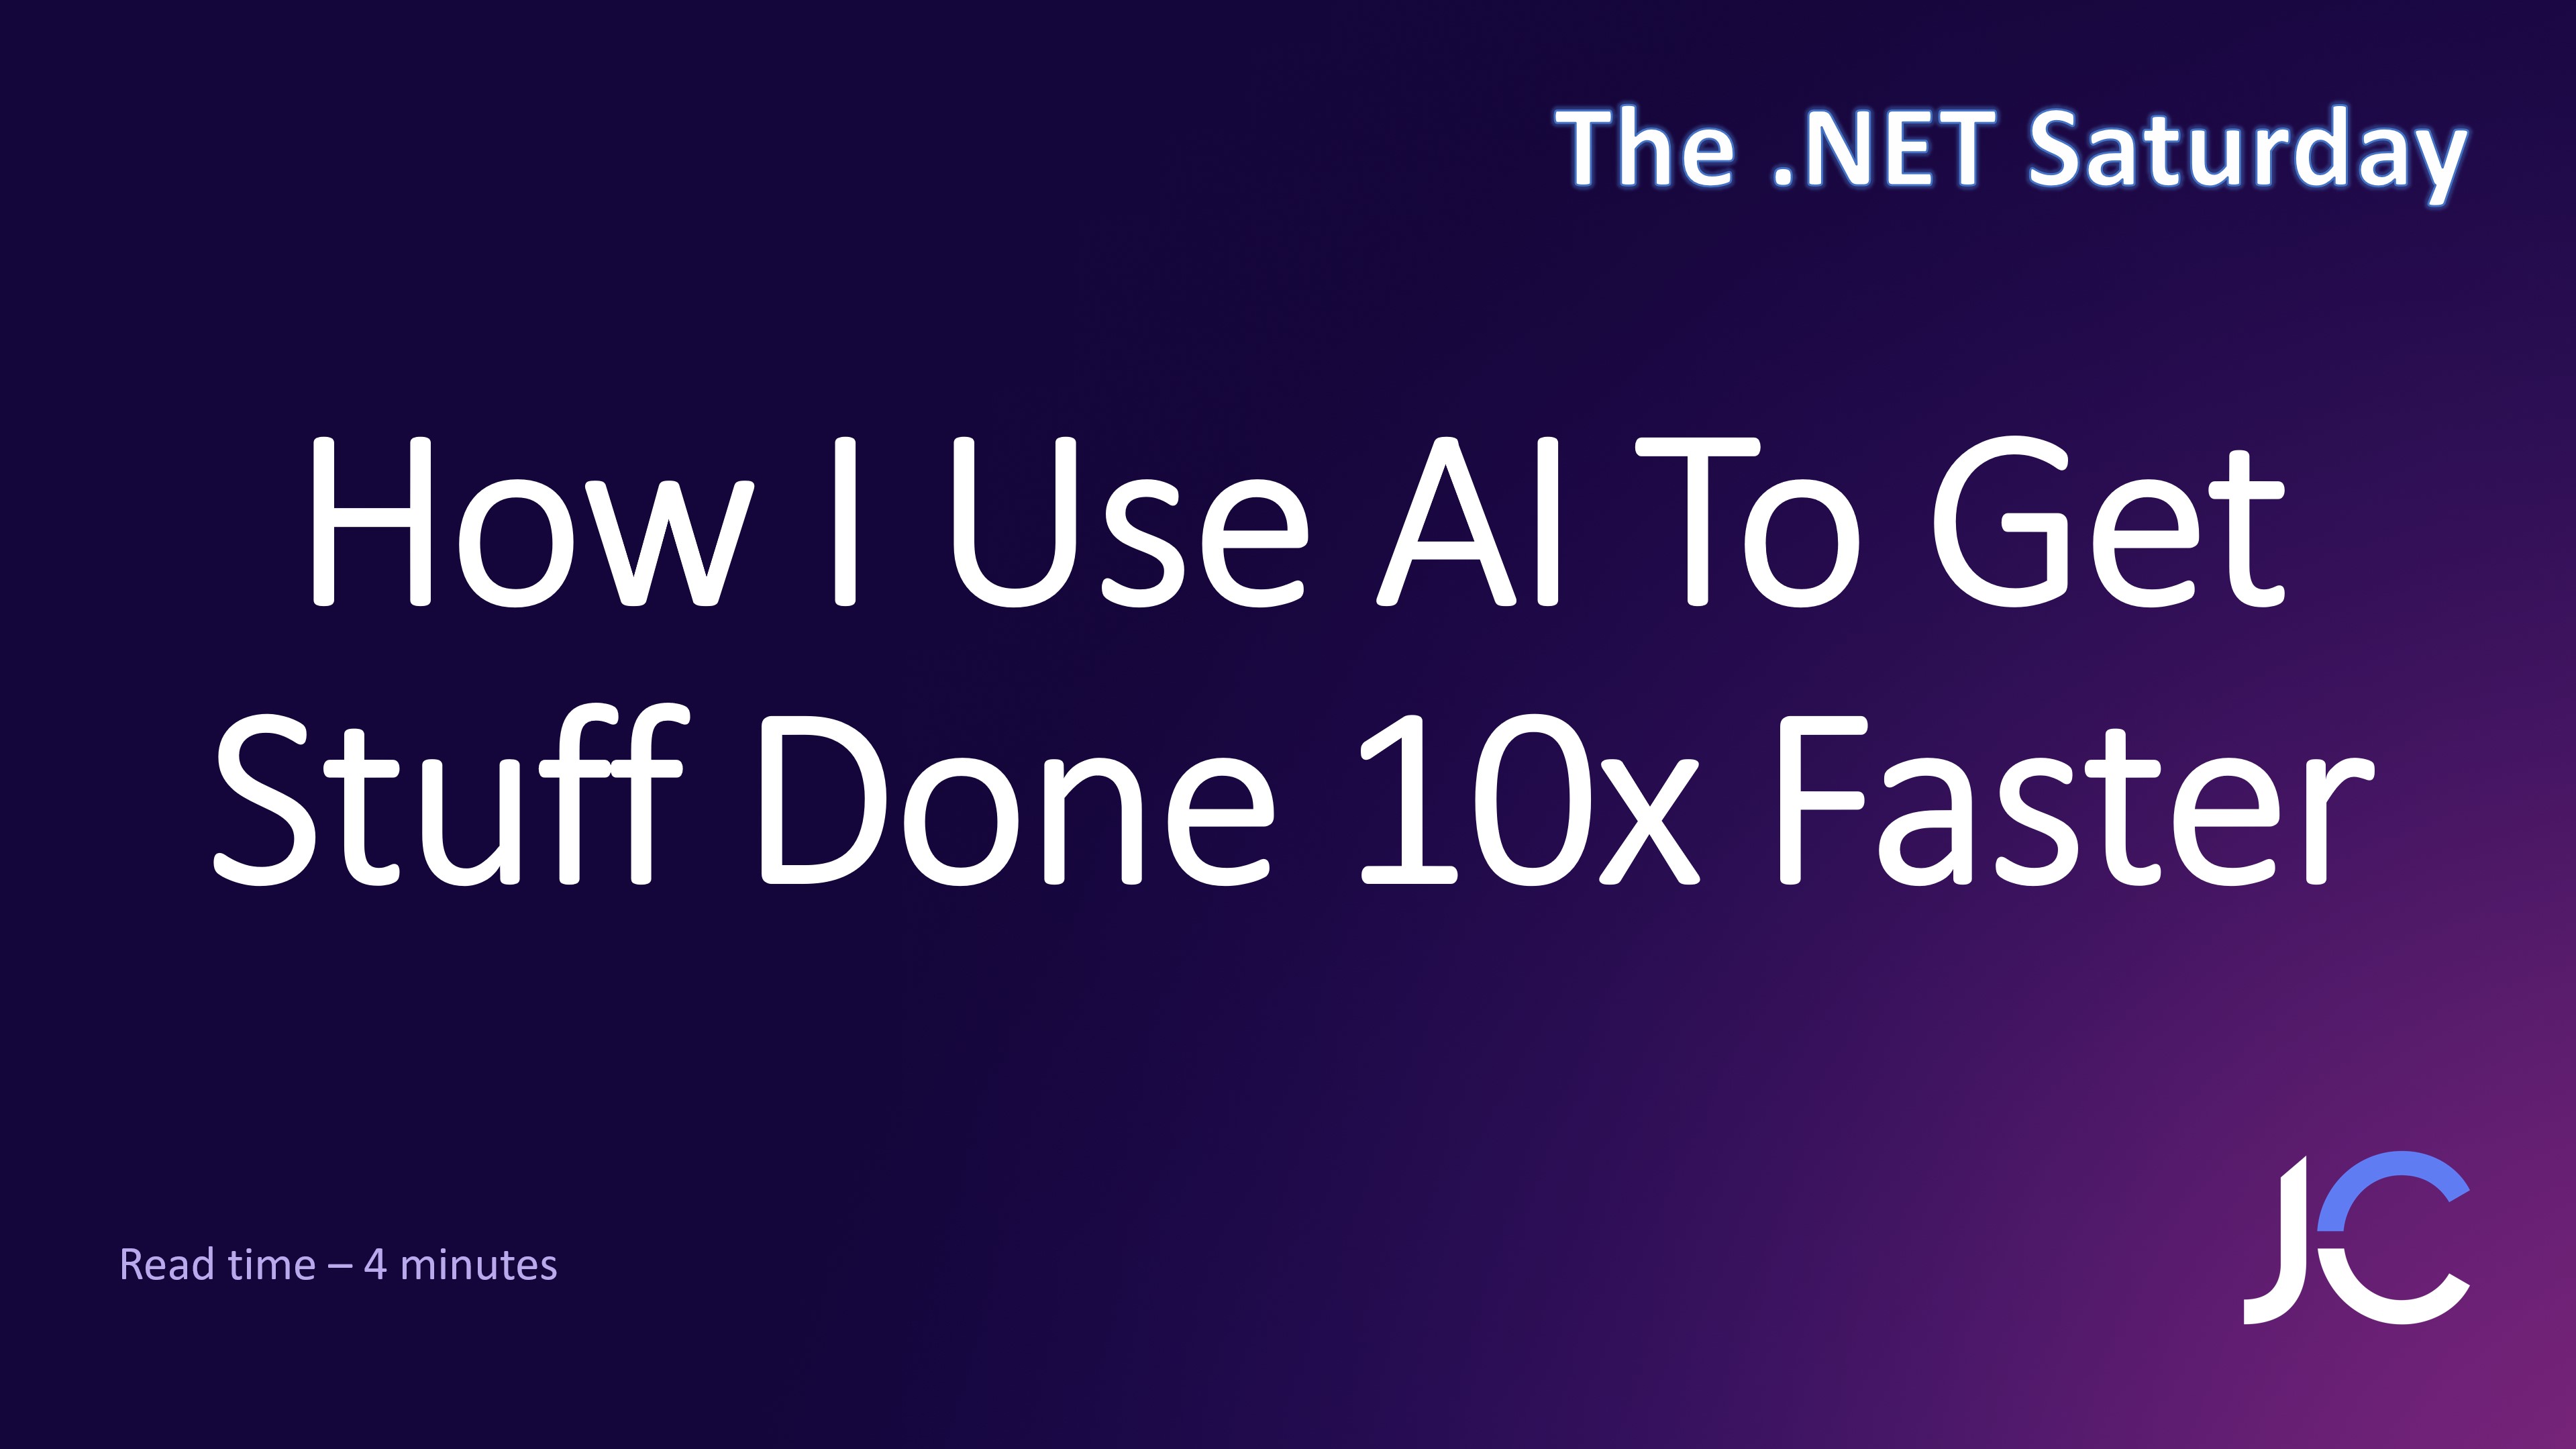 How I Use AI To Get Stuff Done 10x Faster